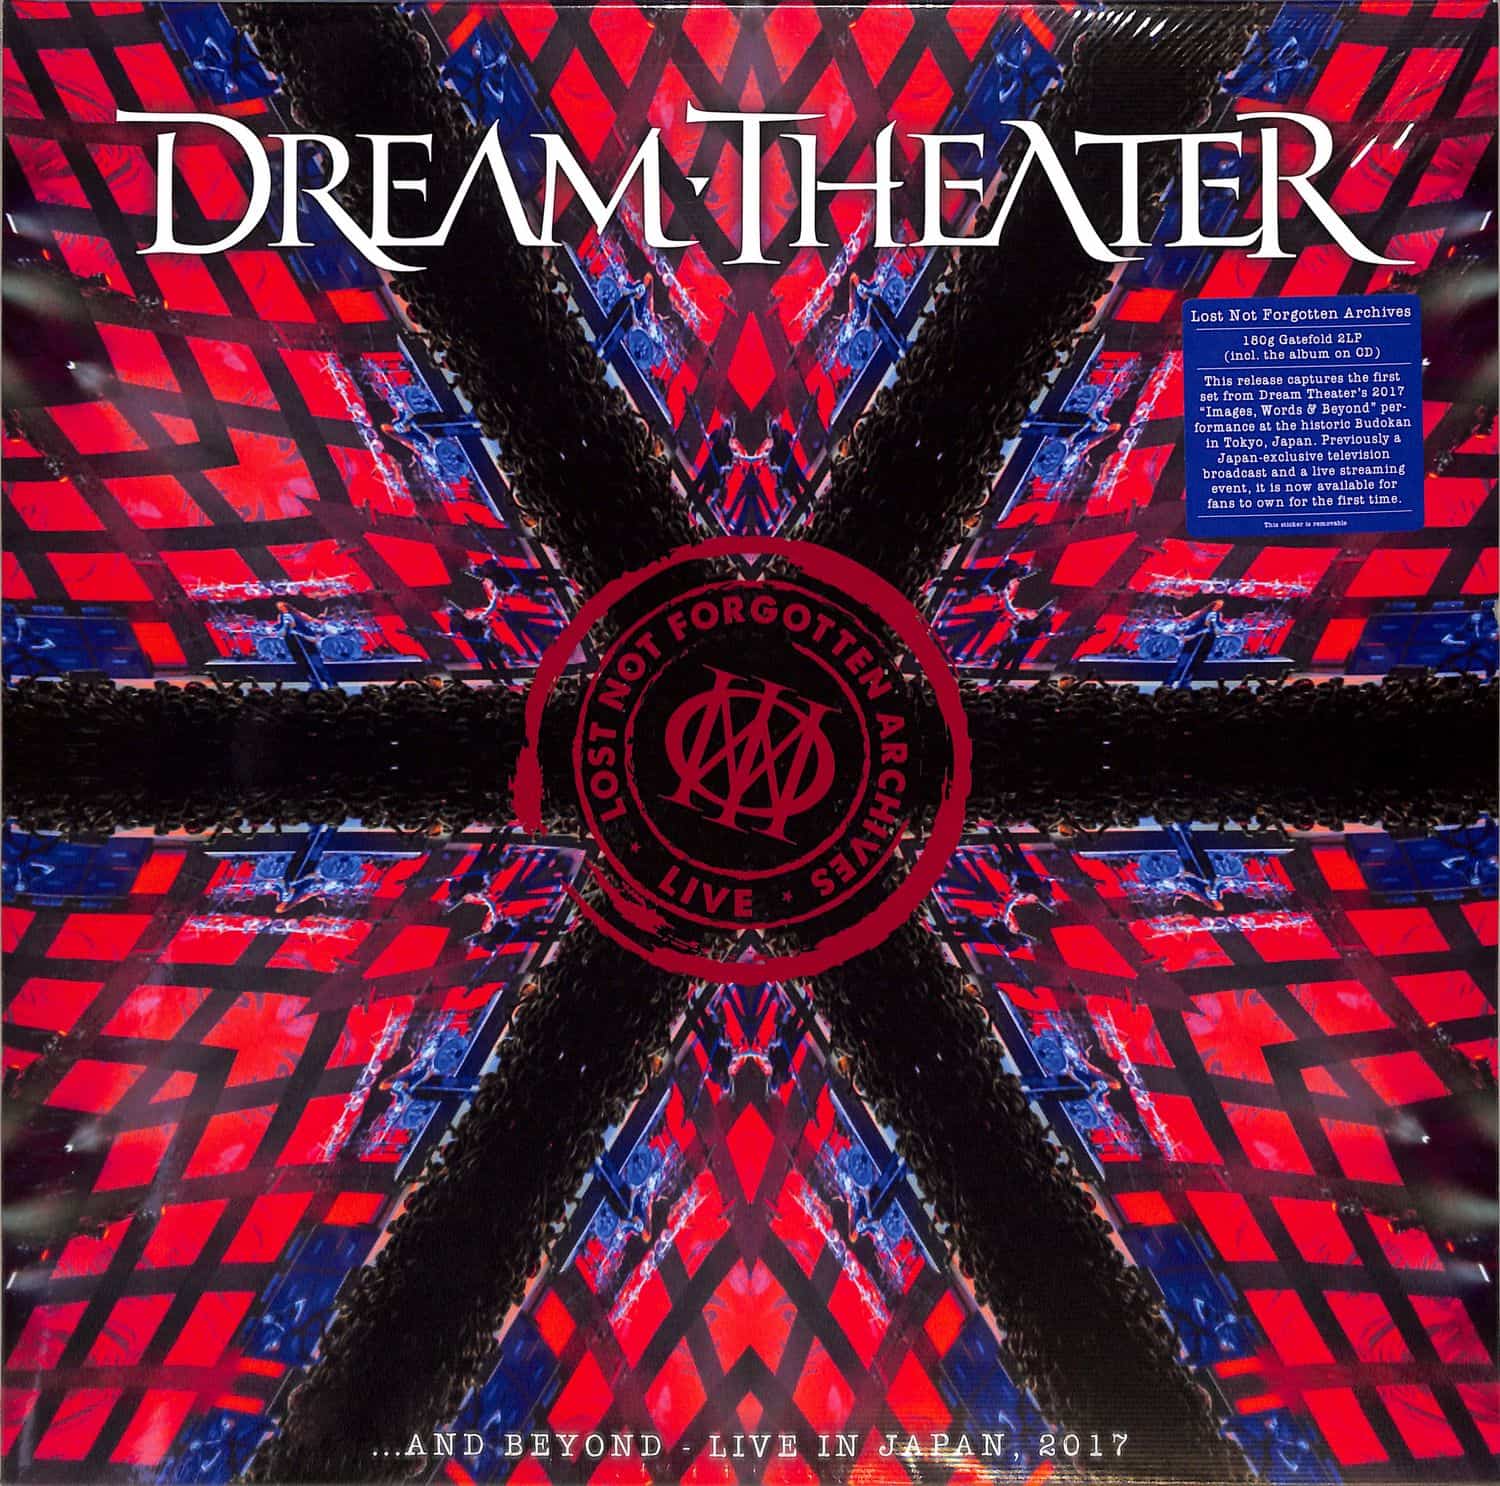 Dream Theater - LOST NOT FORGOTTEN ARCHIVES: ... AND BEYOND - LIVE 